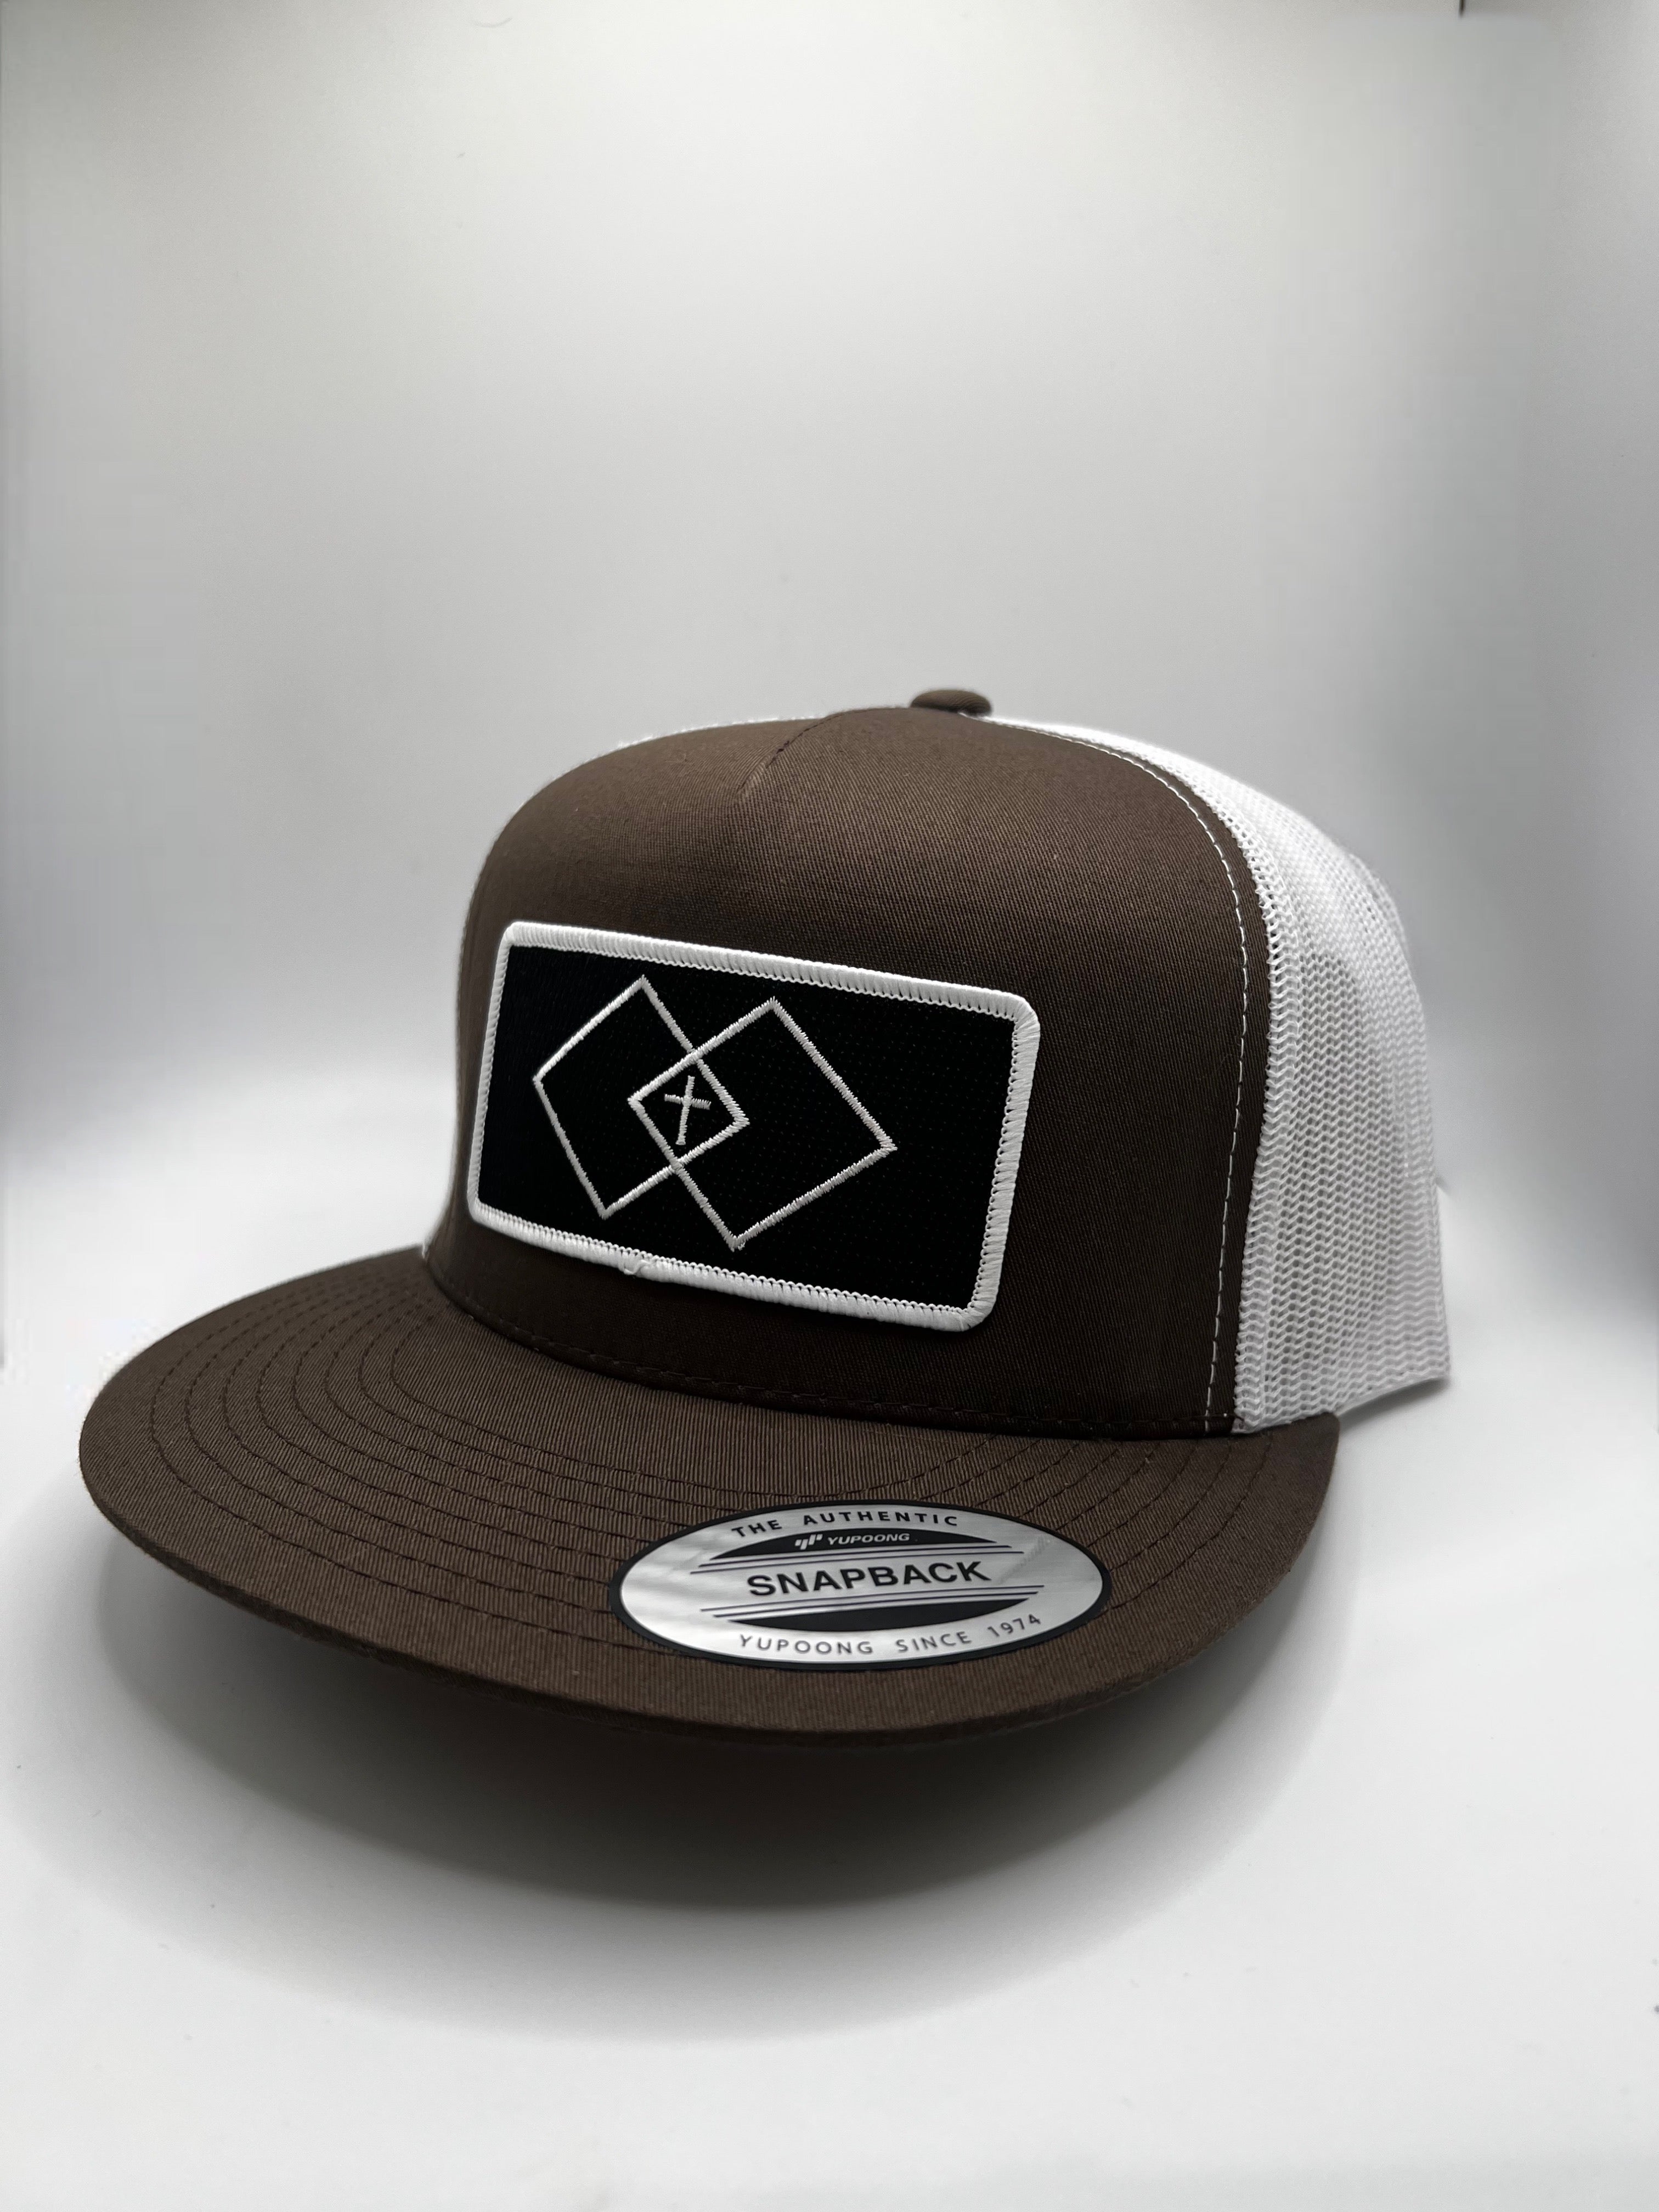 Brown with white mesh FLATBILL - brand patch